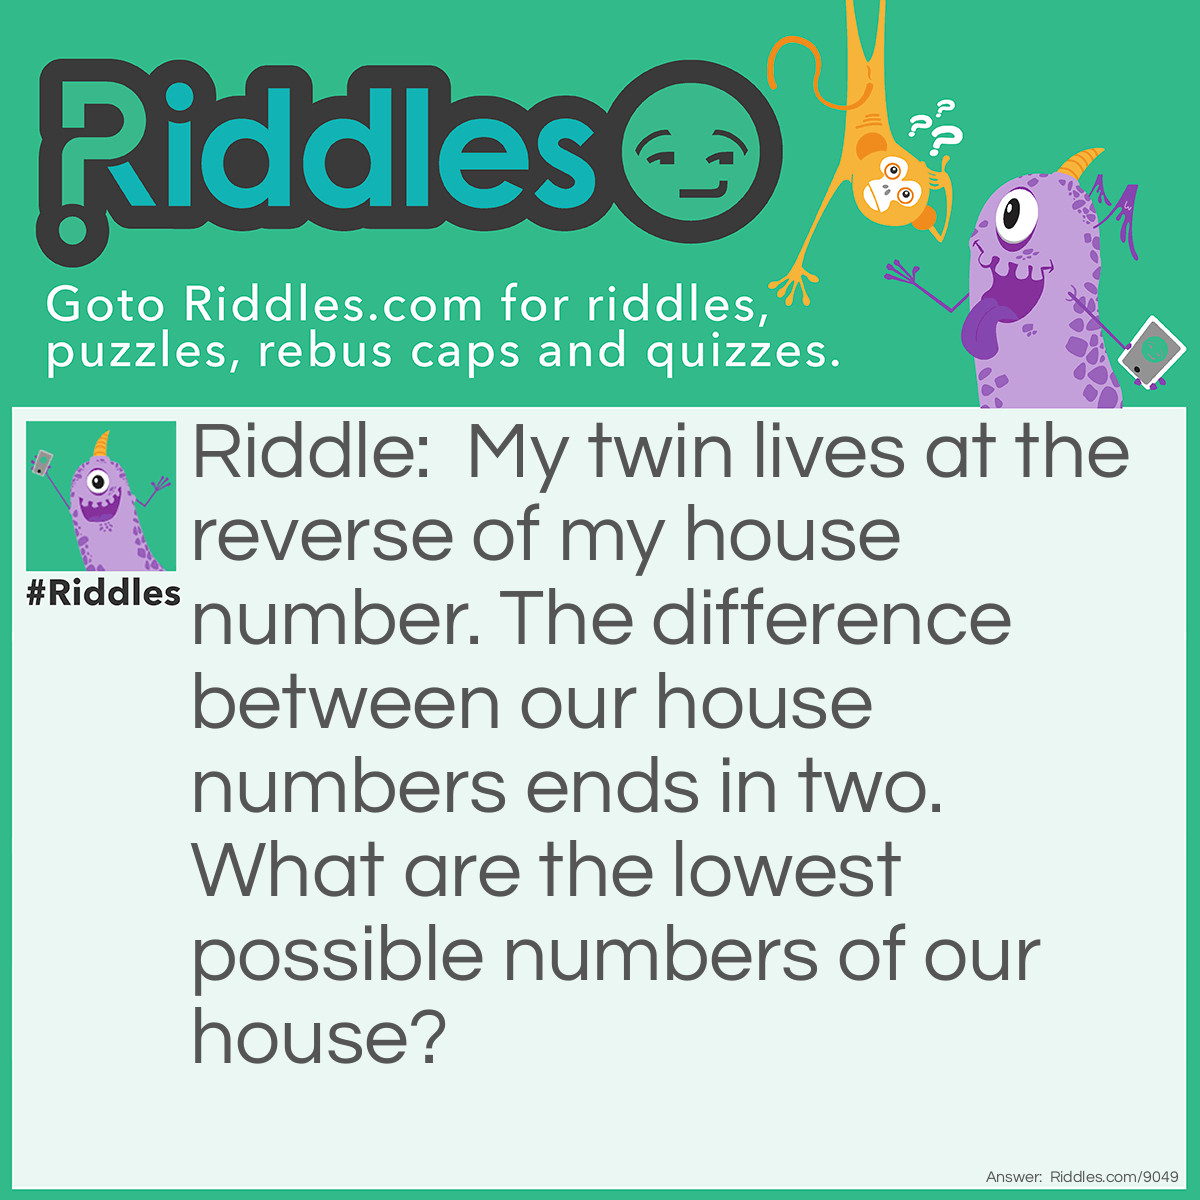 Riddle: My twin lives at the reverse of my house number. The difference between our house numbers ends in two. What are the lowest possible numbers of our house? Answer: The lowest possible numbers for our house are 19 and 91.